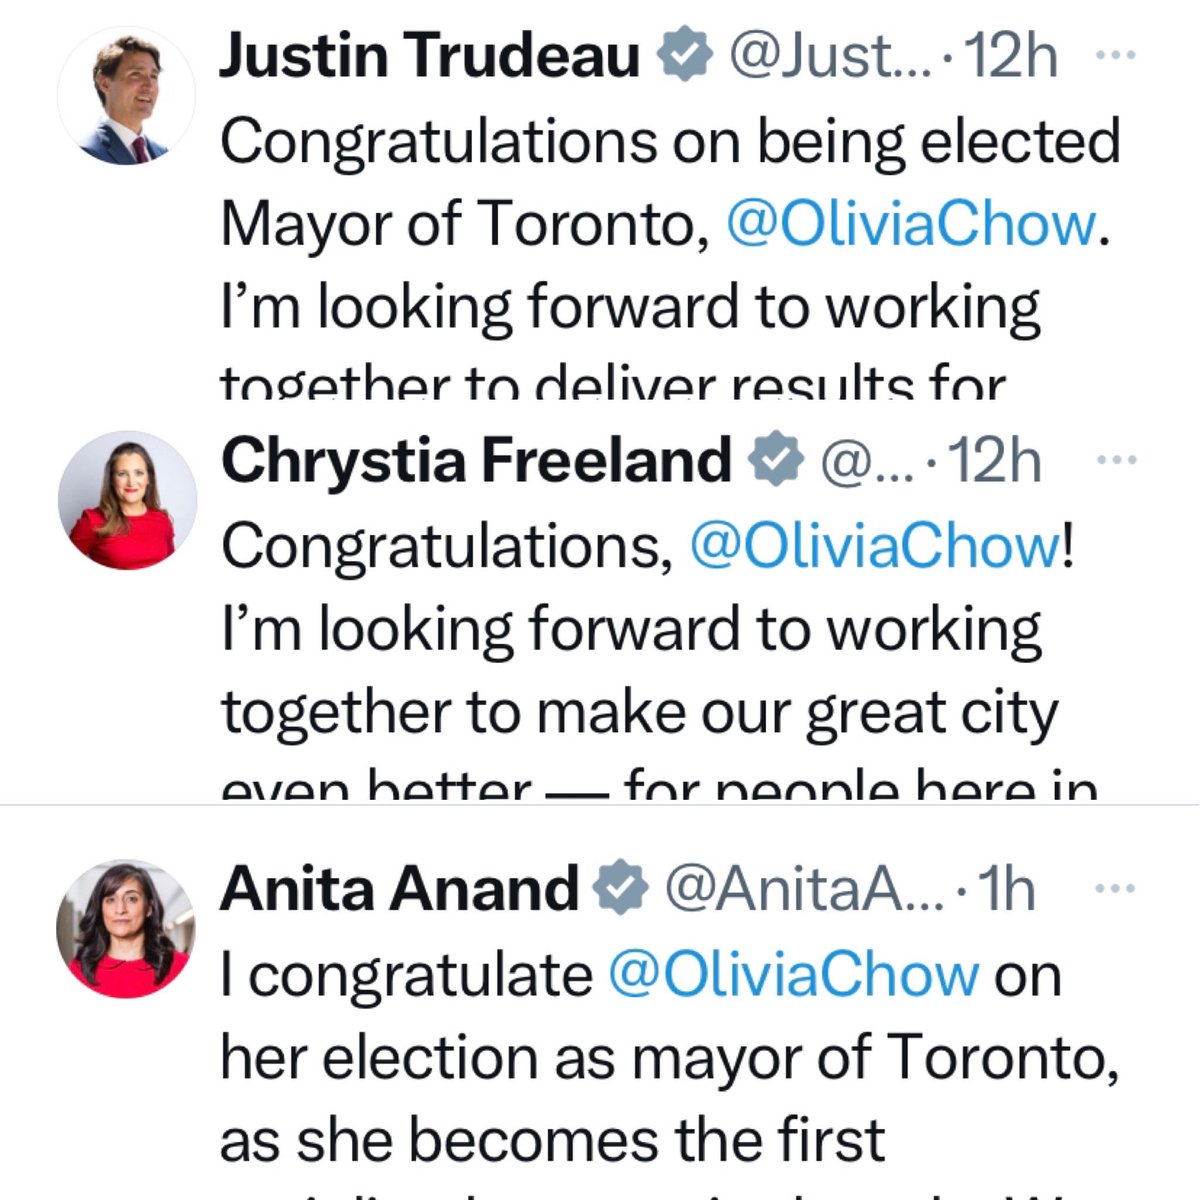 This is how we know Olivia Chow was selected #SelectedNotElected #LiberalCorruption #LiberalsMustGo